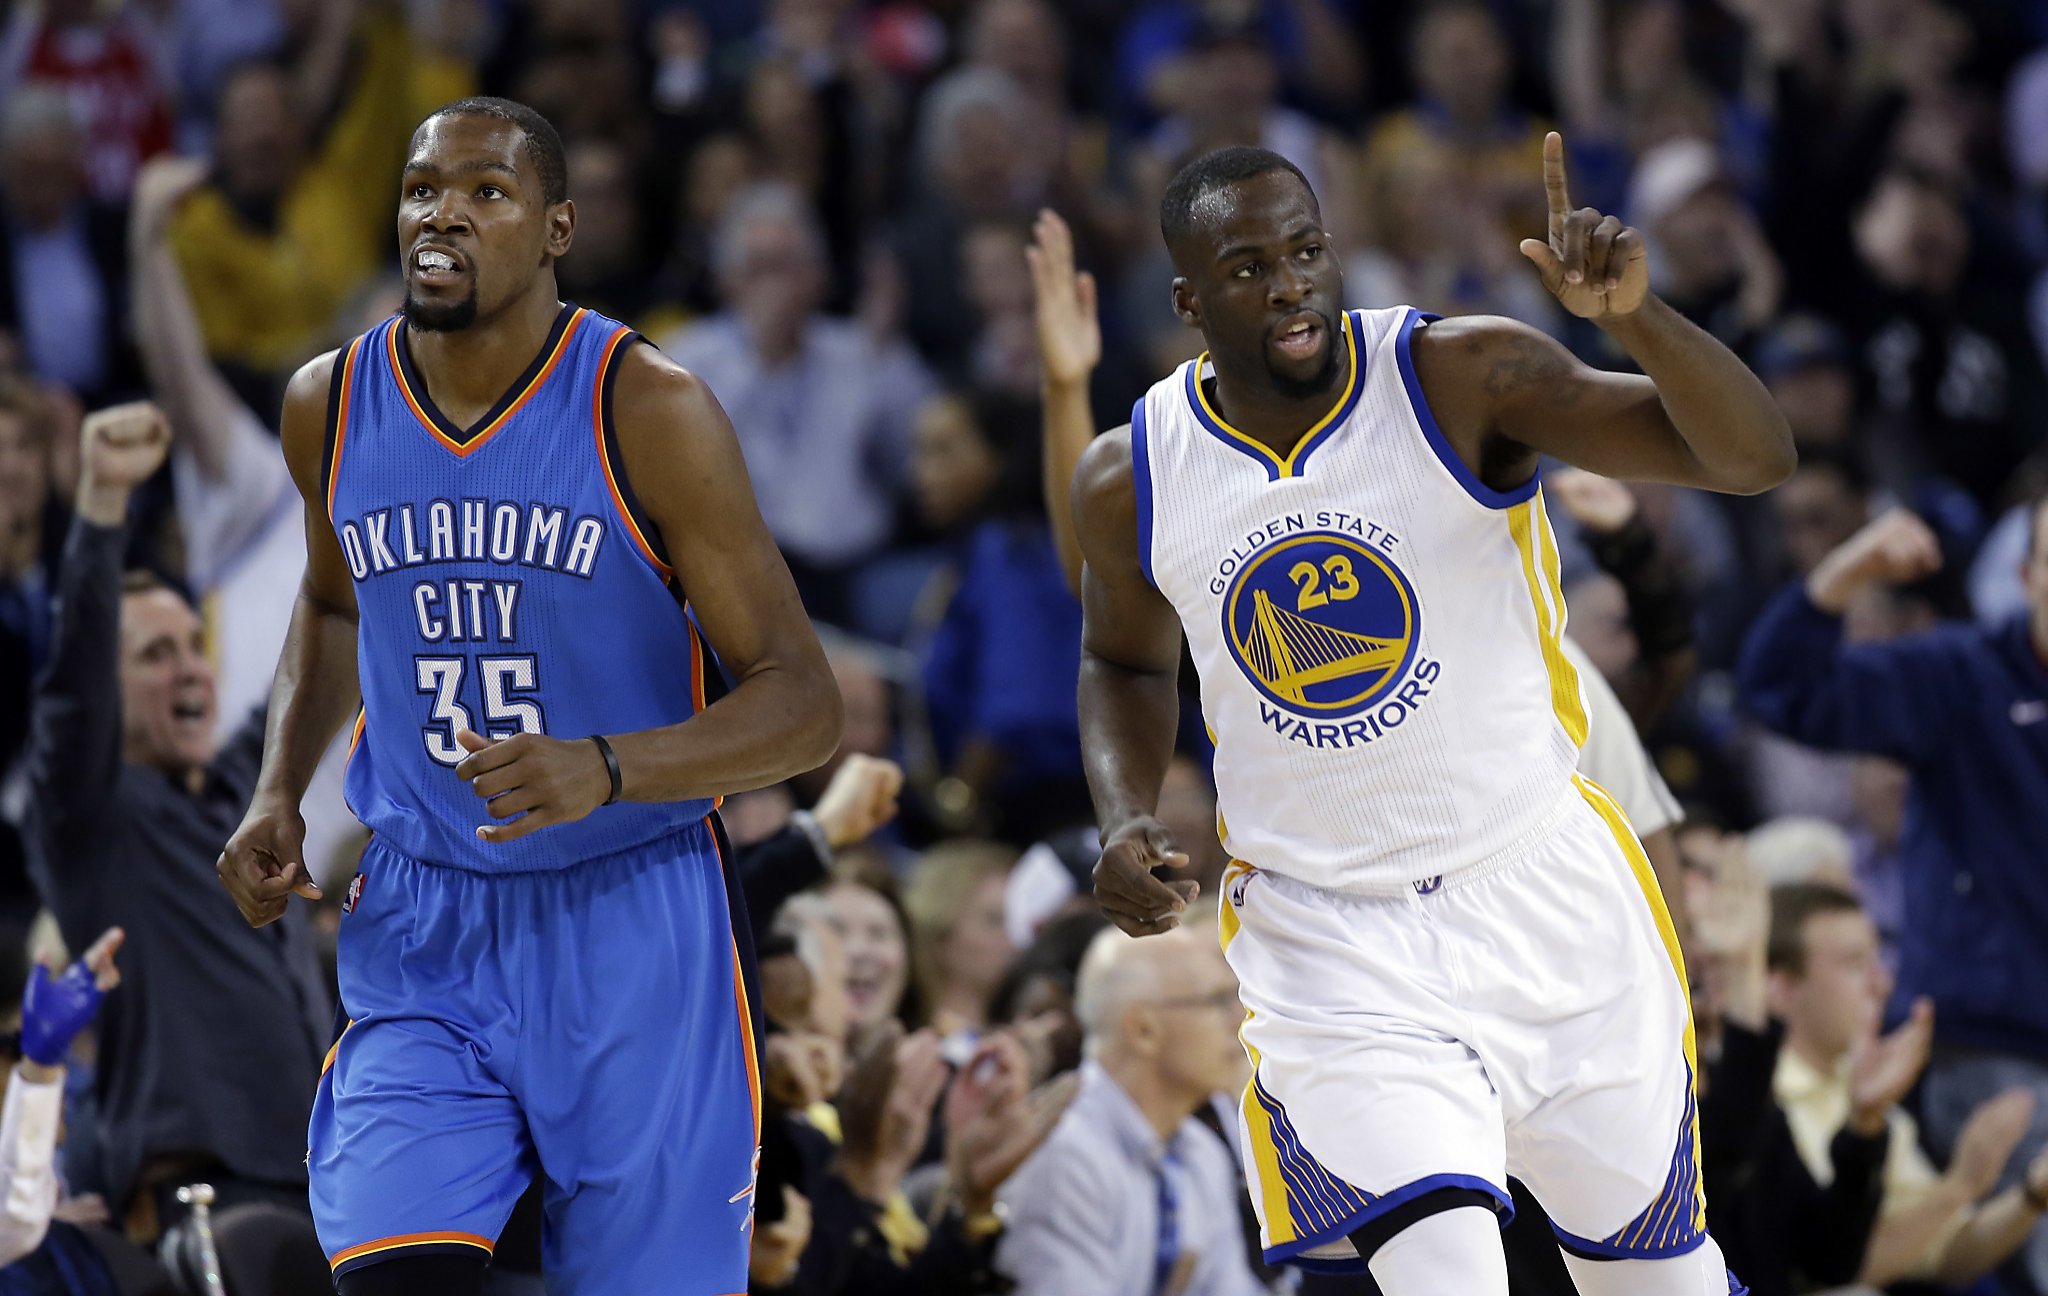 Draymond Green called Kevin Durant after the Warriors lost Game 7 